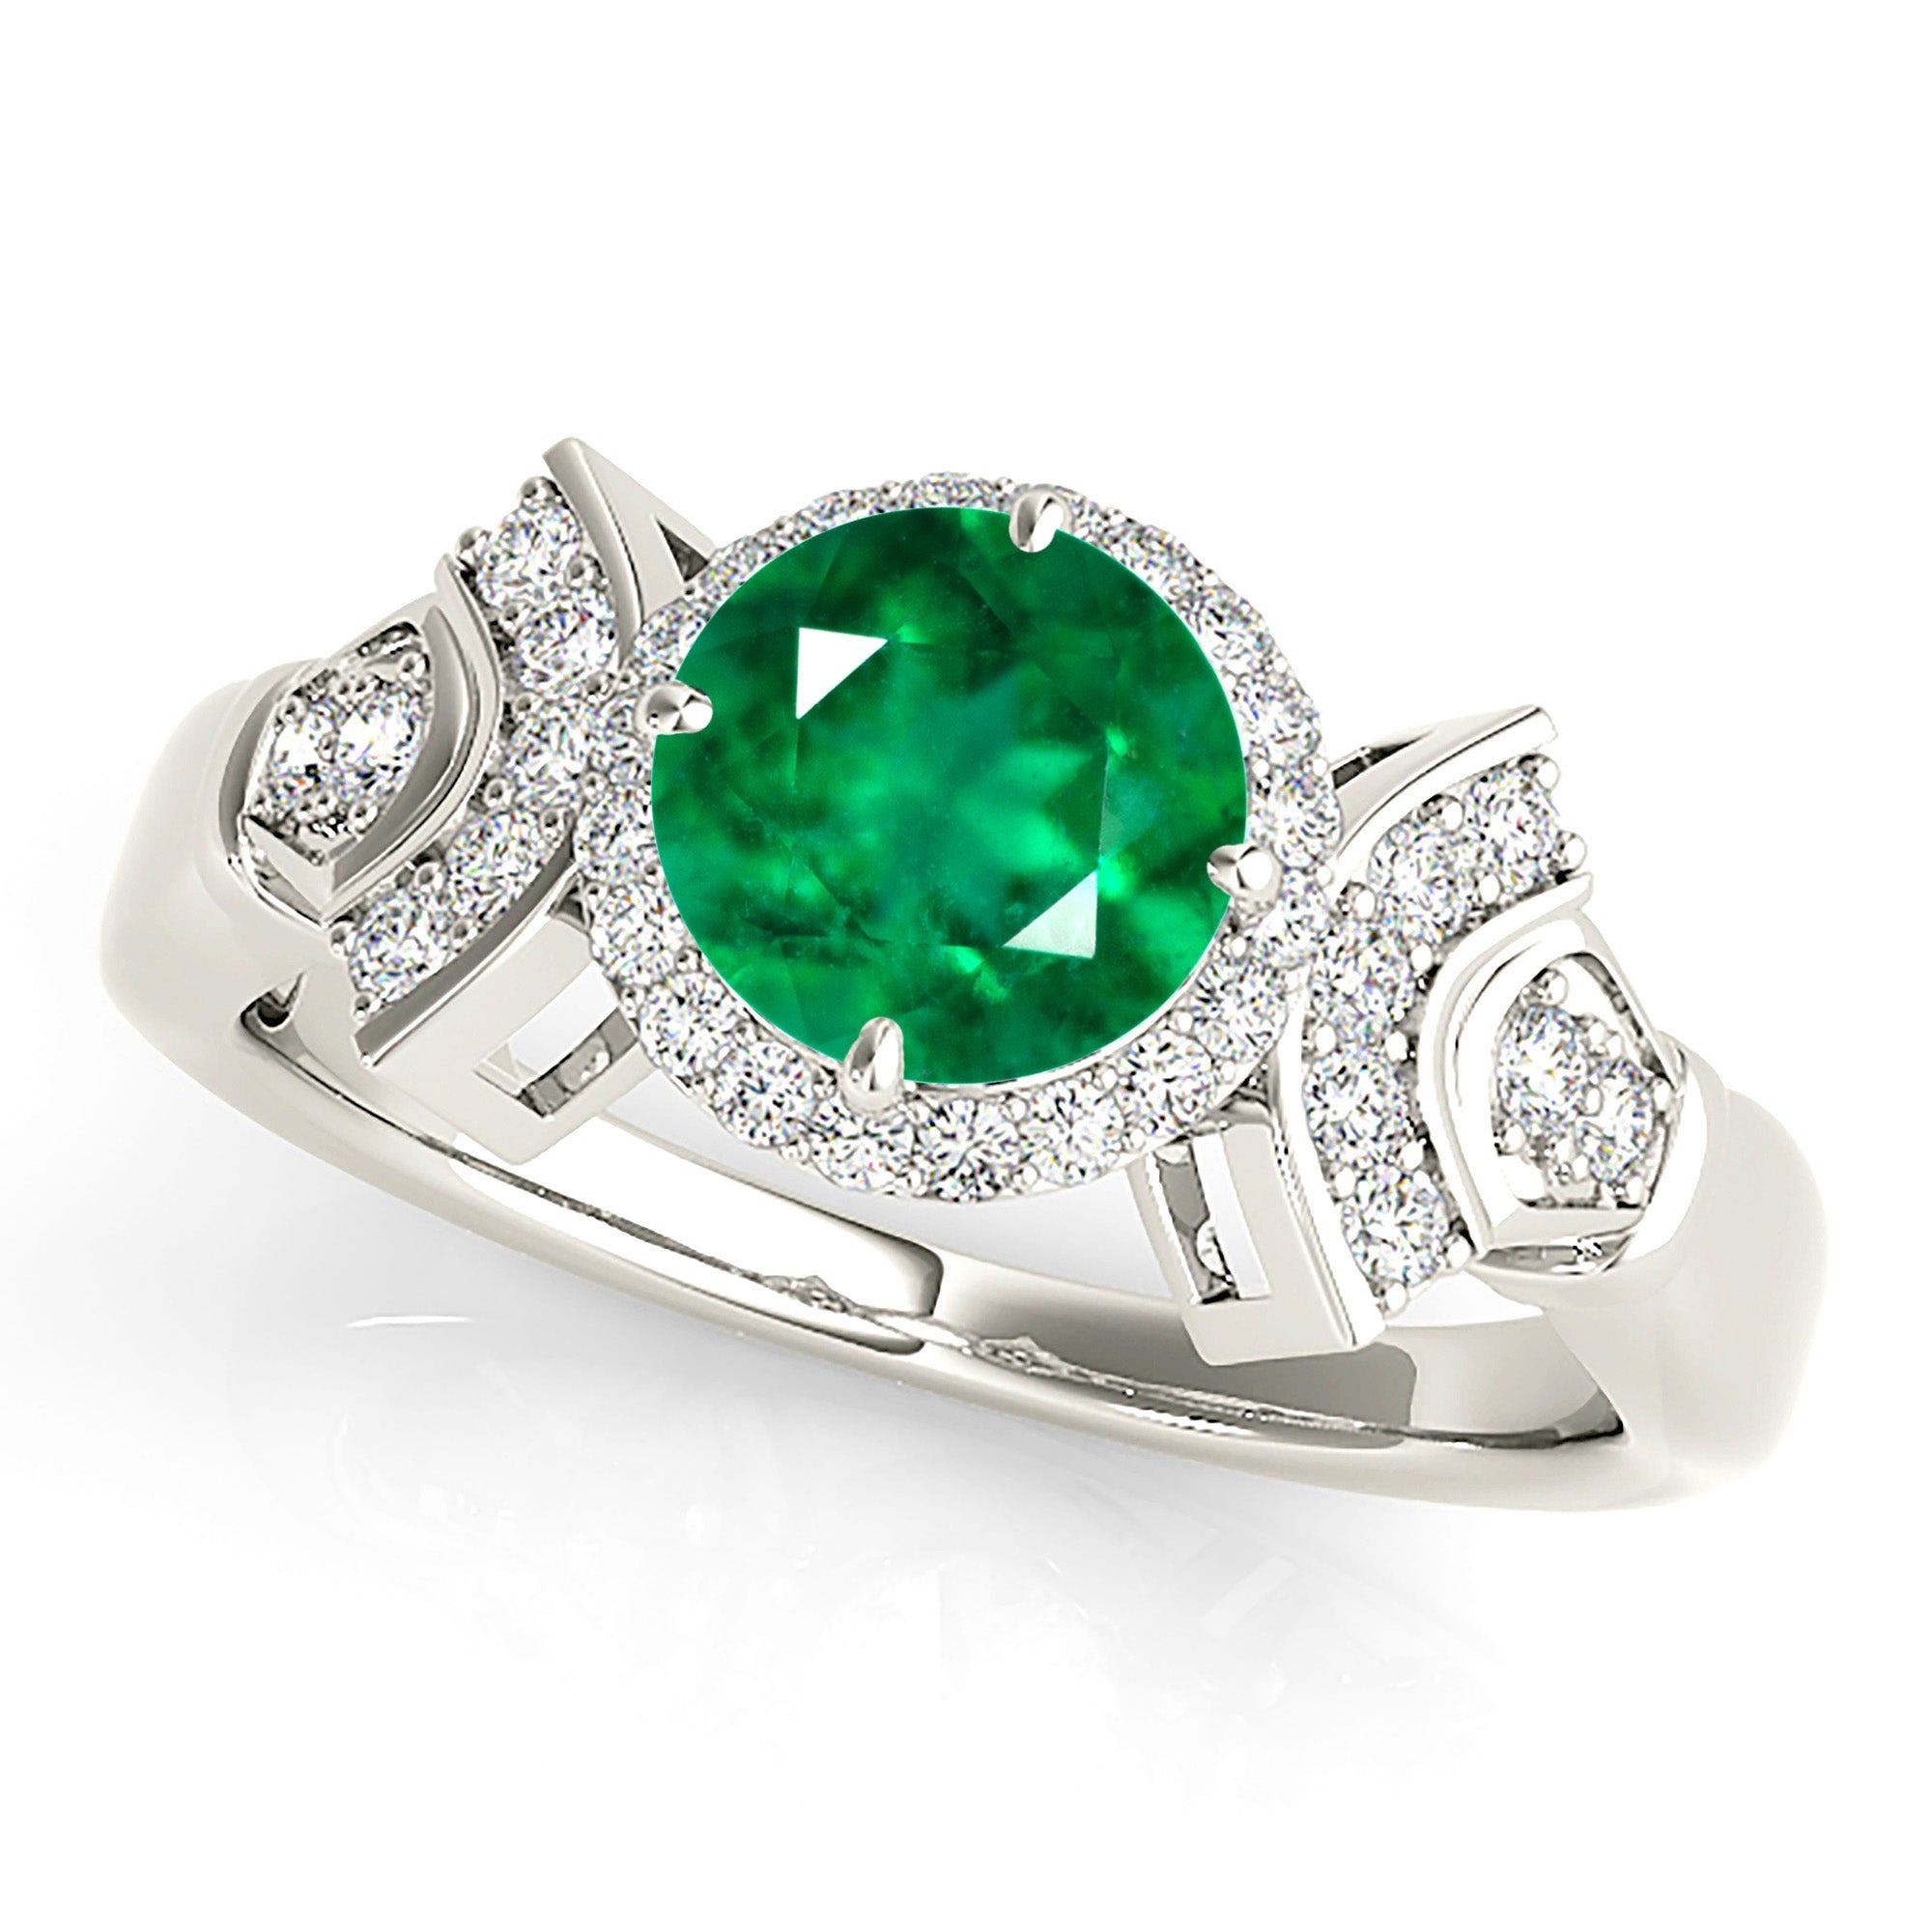 1.68 ct. Genuine Emerald Ring With 0.25 ctw. Diamond Halo and Fancy Design Diamond Band-in 14K/18K White, Yellow, Rose Gold and Platinum - Christmas Jewelry Gift -VIRABYANI